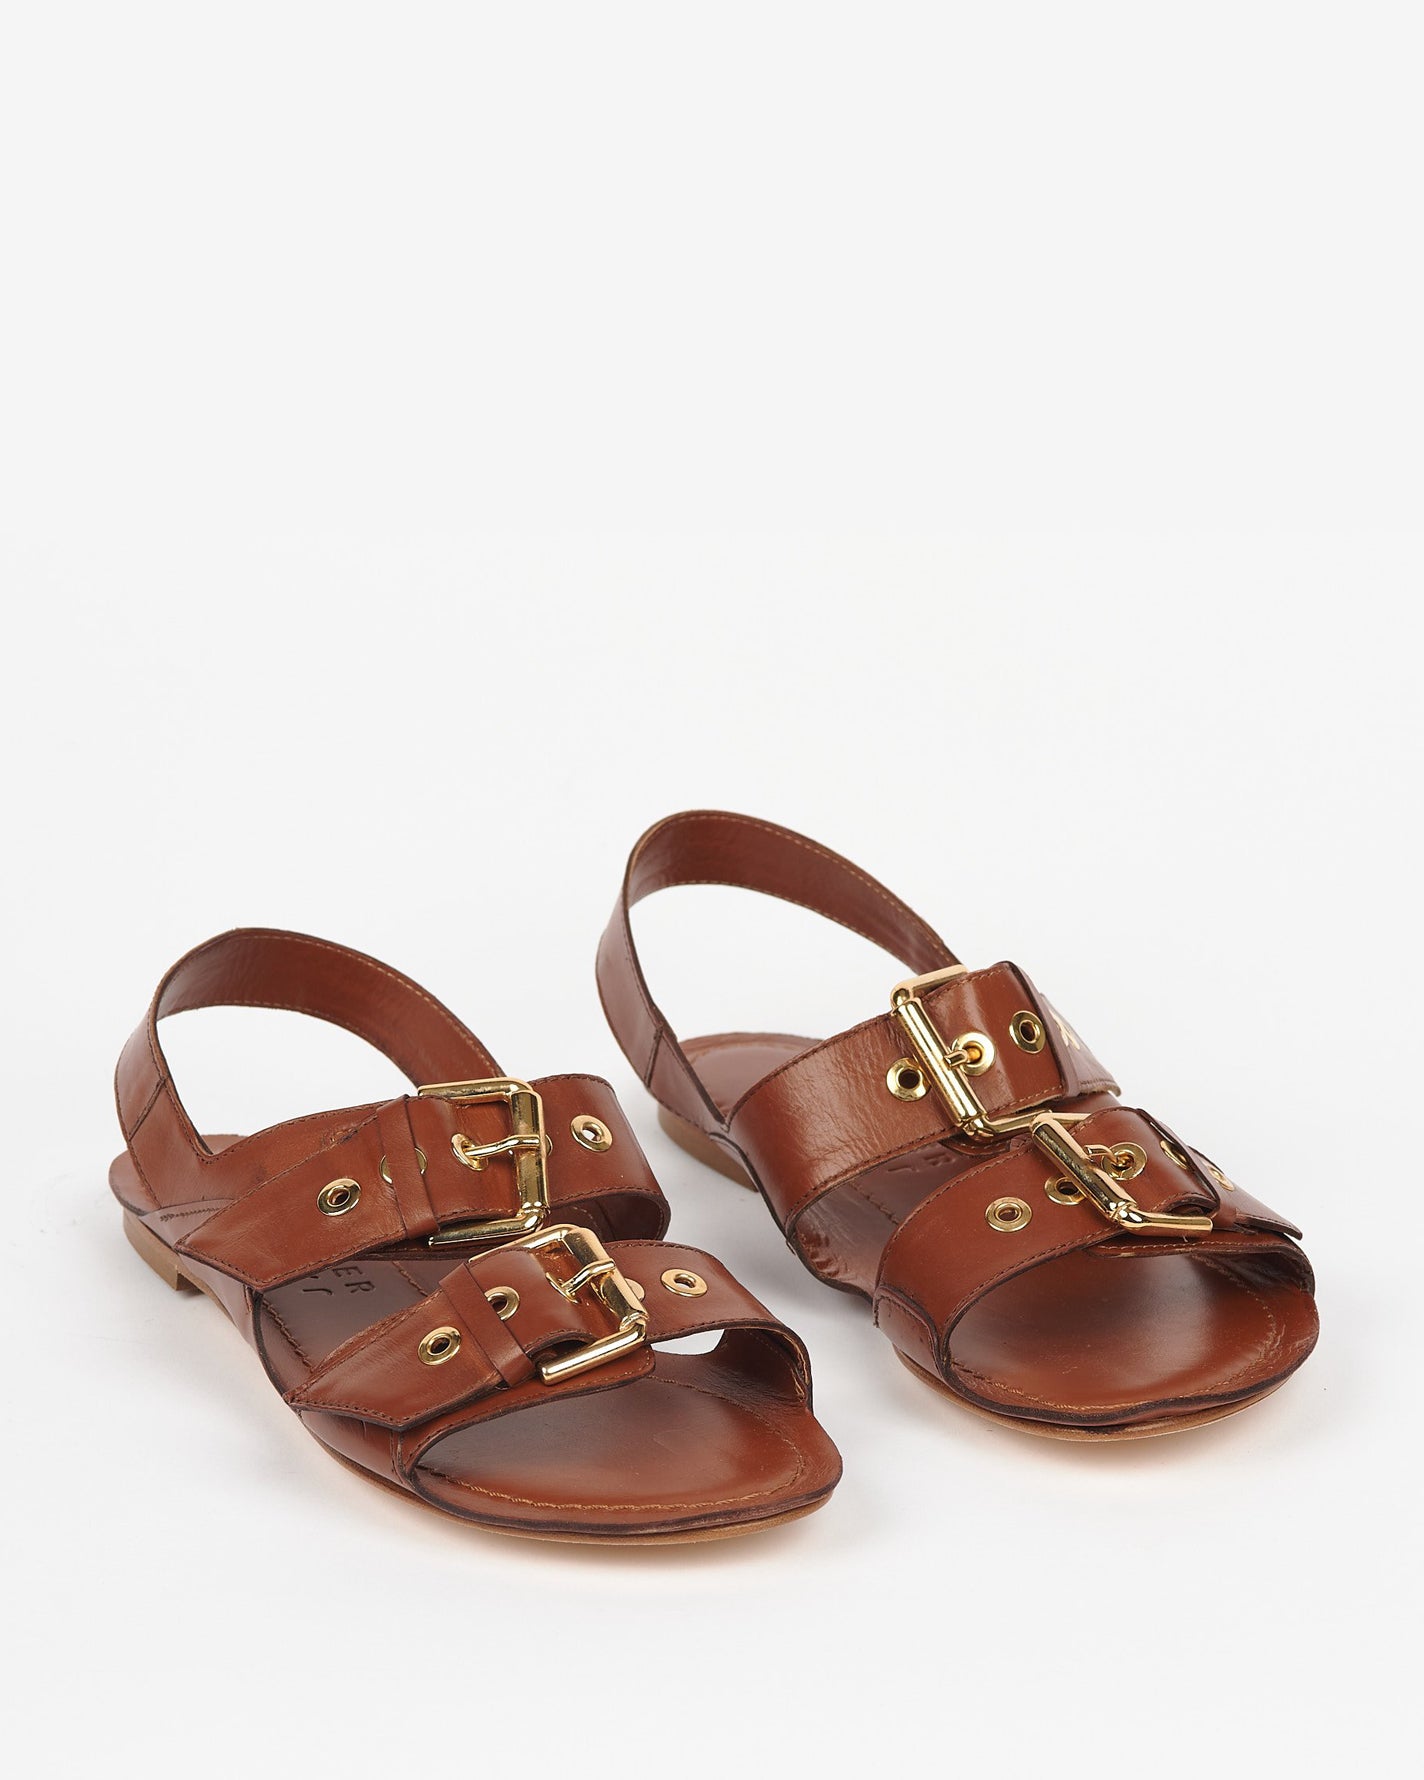 angled view of the Jamie Haller Double Buckle Sandal in Cognac